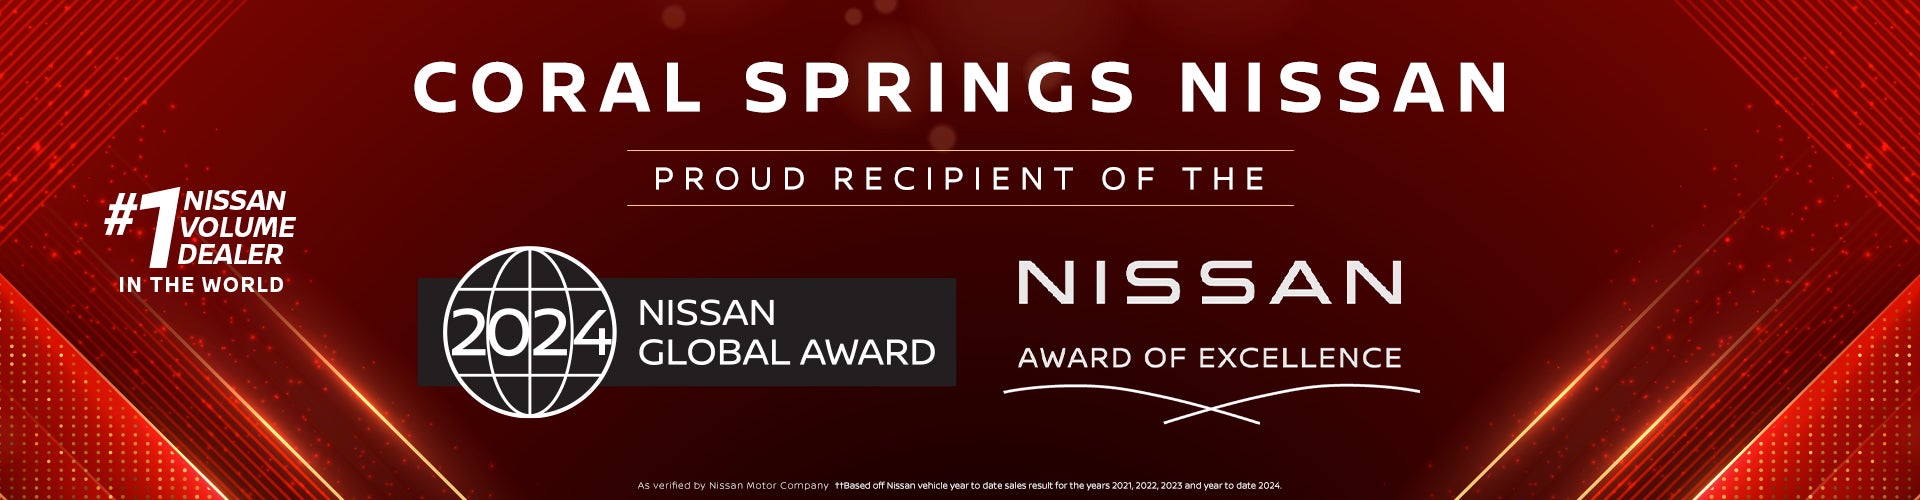 Coral Springs Nissan Proud recipient of the 2024 Nissan Awa